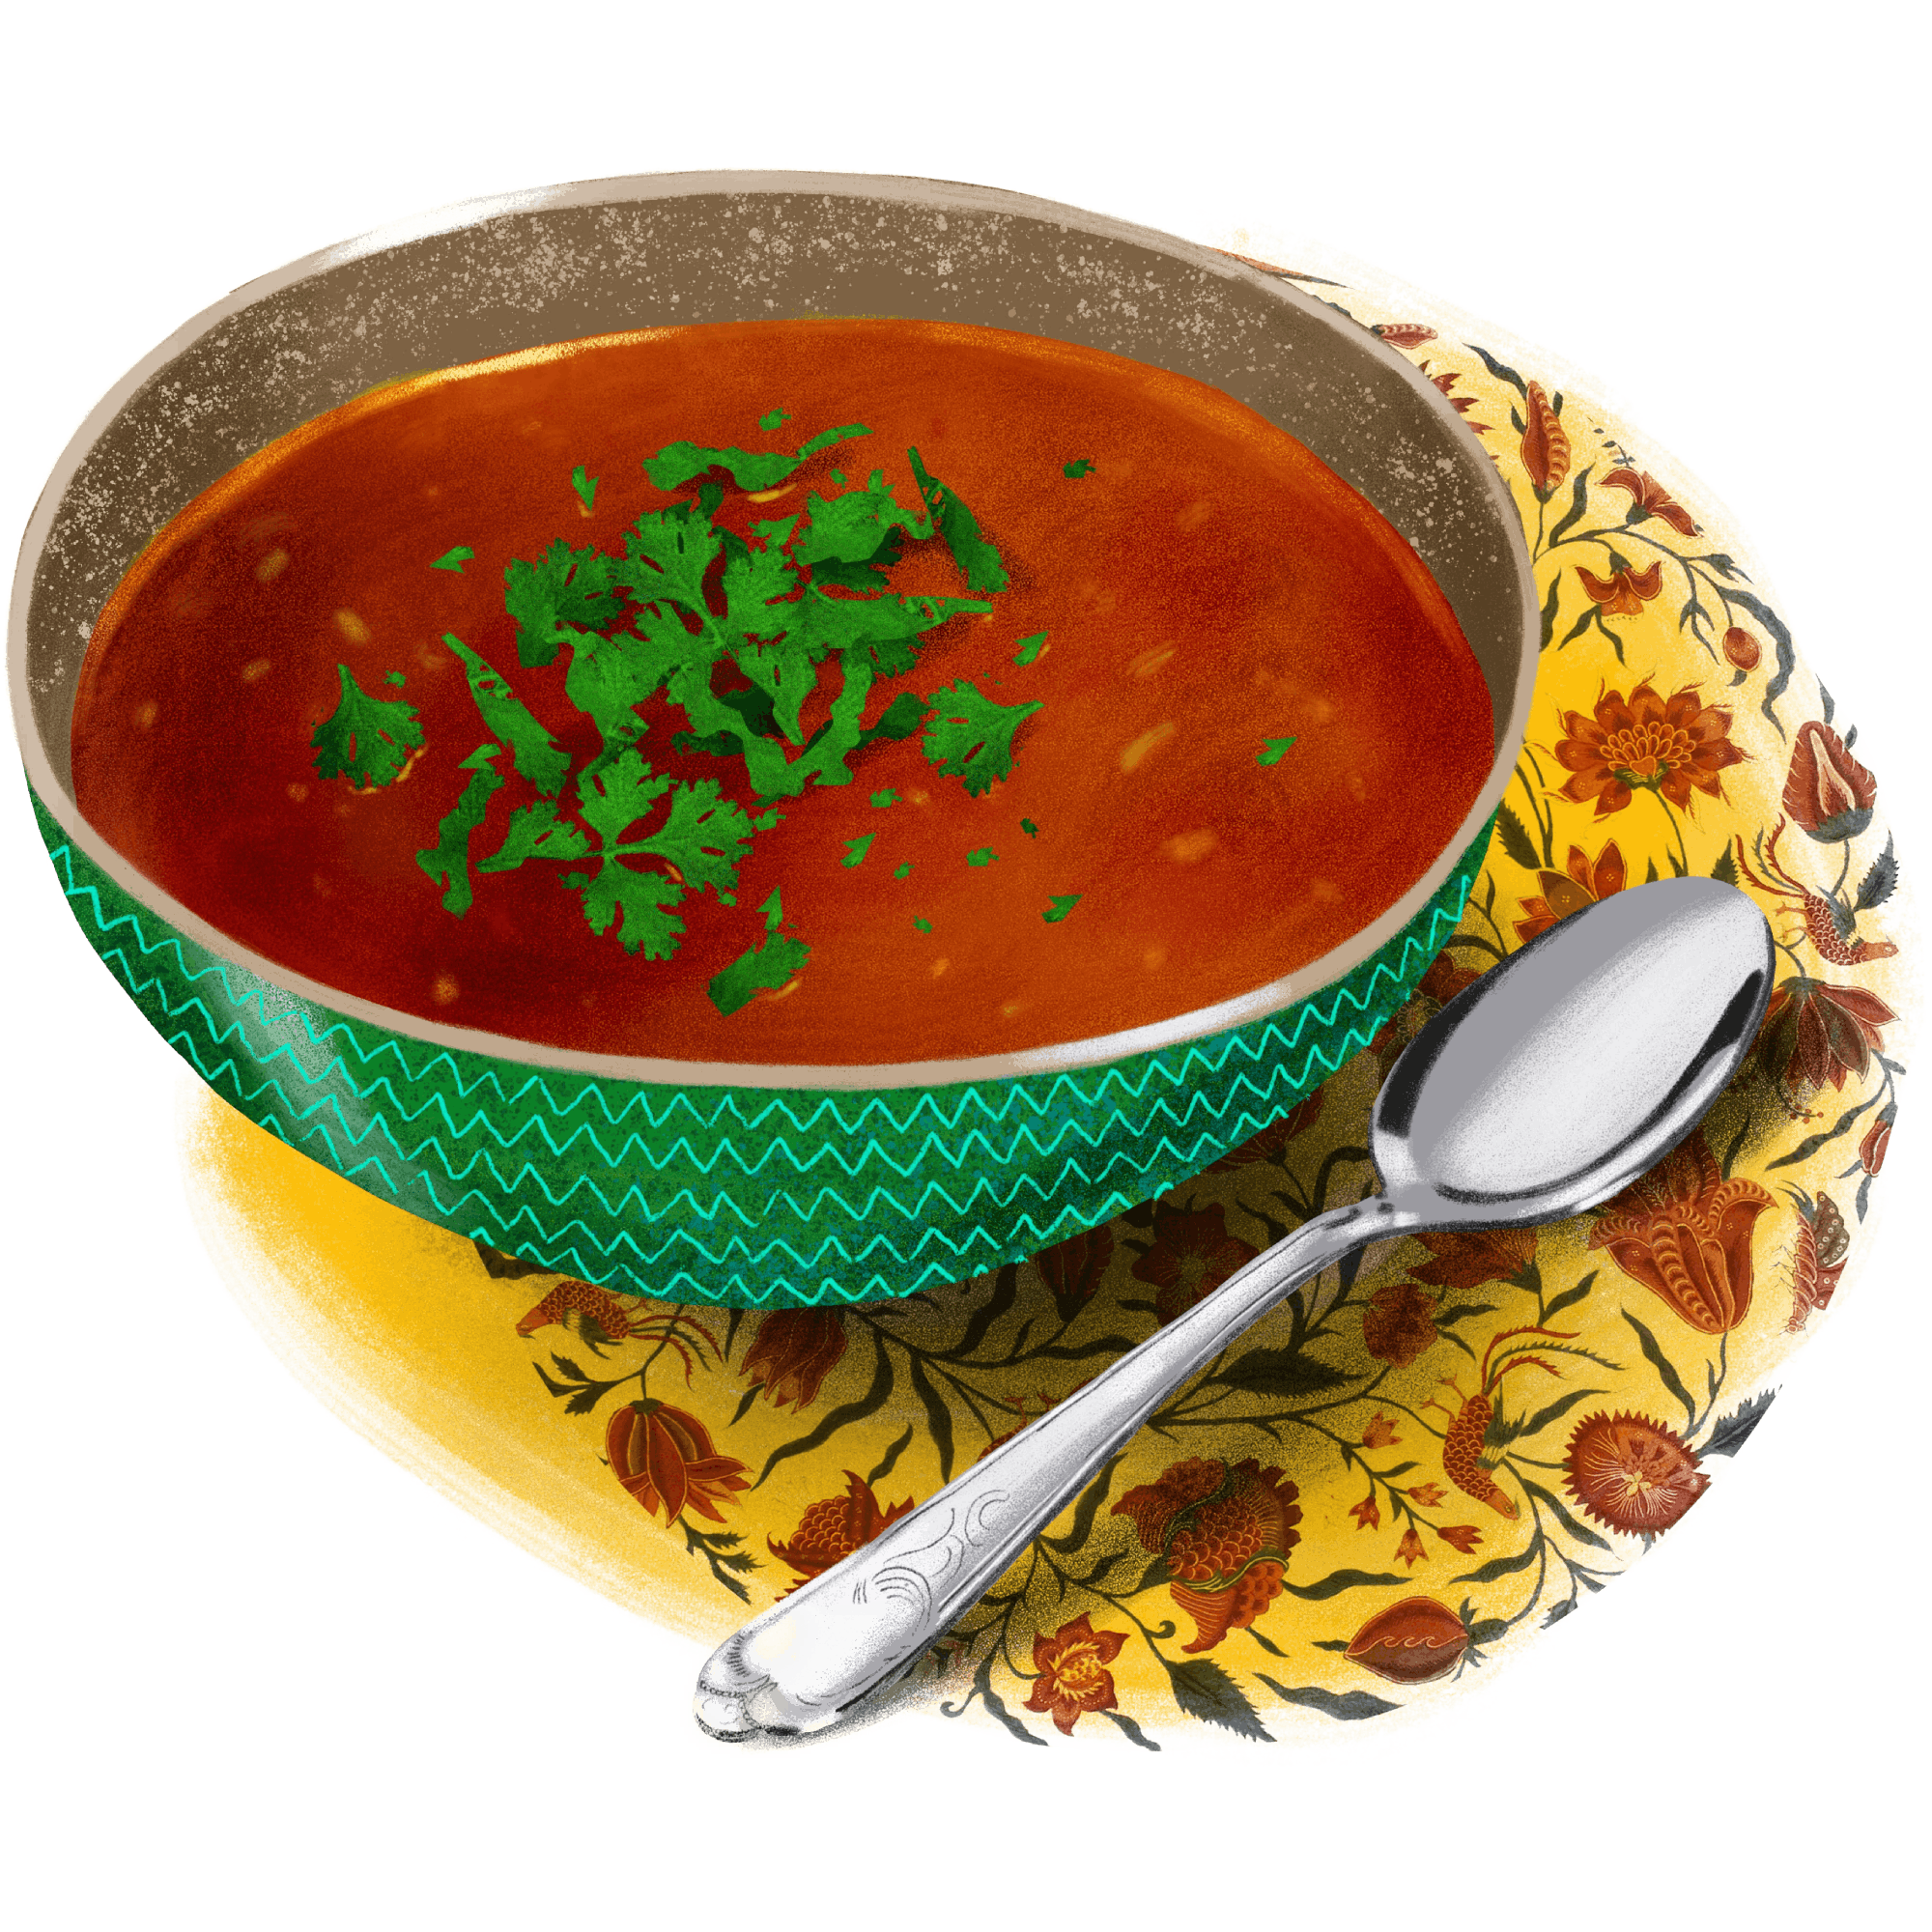 An illustration of tomato soup in a bright green bowl and garnished with cilantro. 